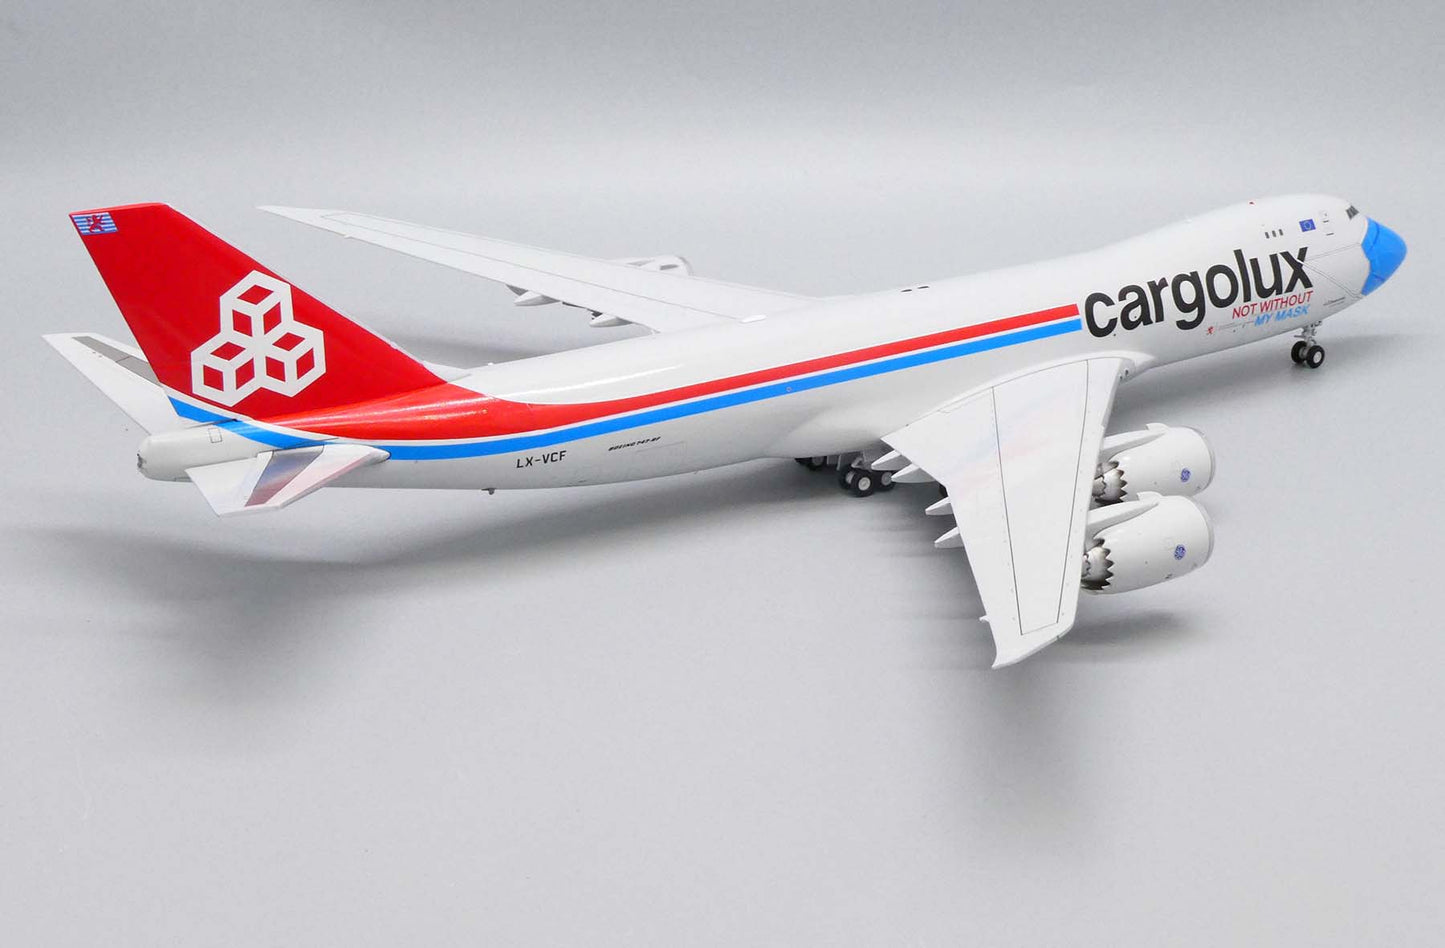 1:200 JC Wings Cargolux Boeing 747-8F "Not Without My Mask" XX20079 LX-VCF